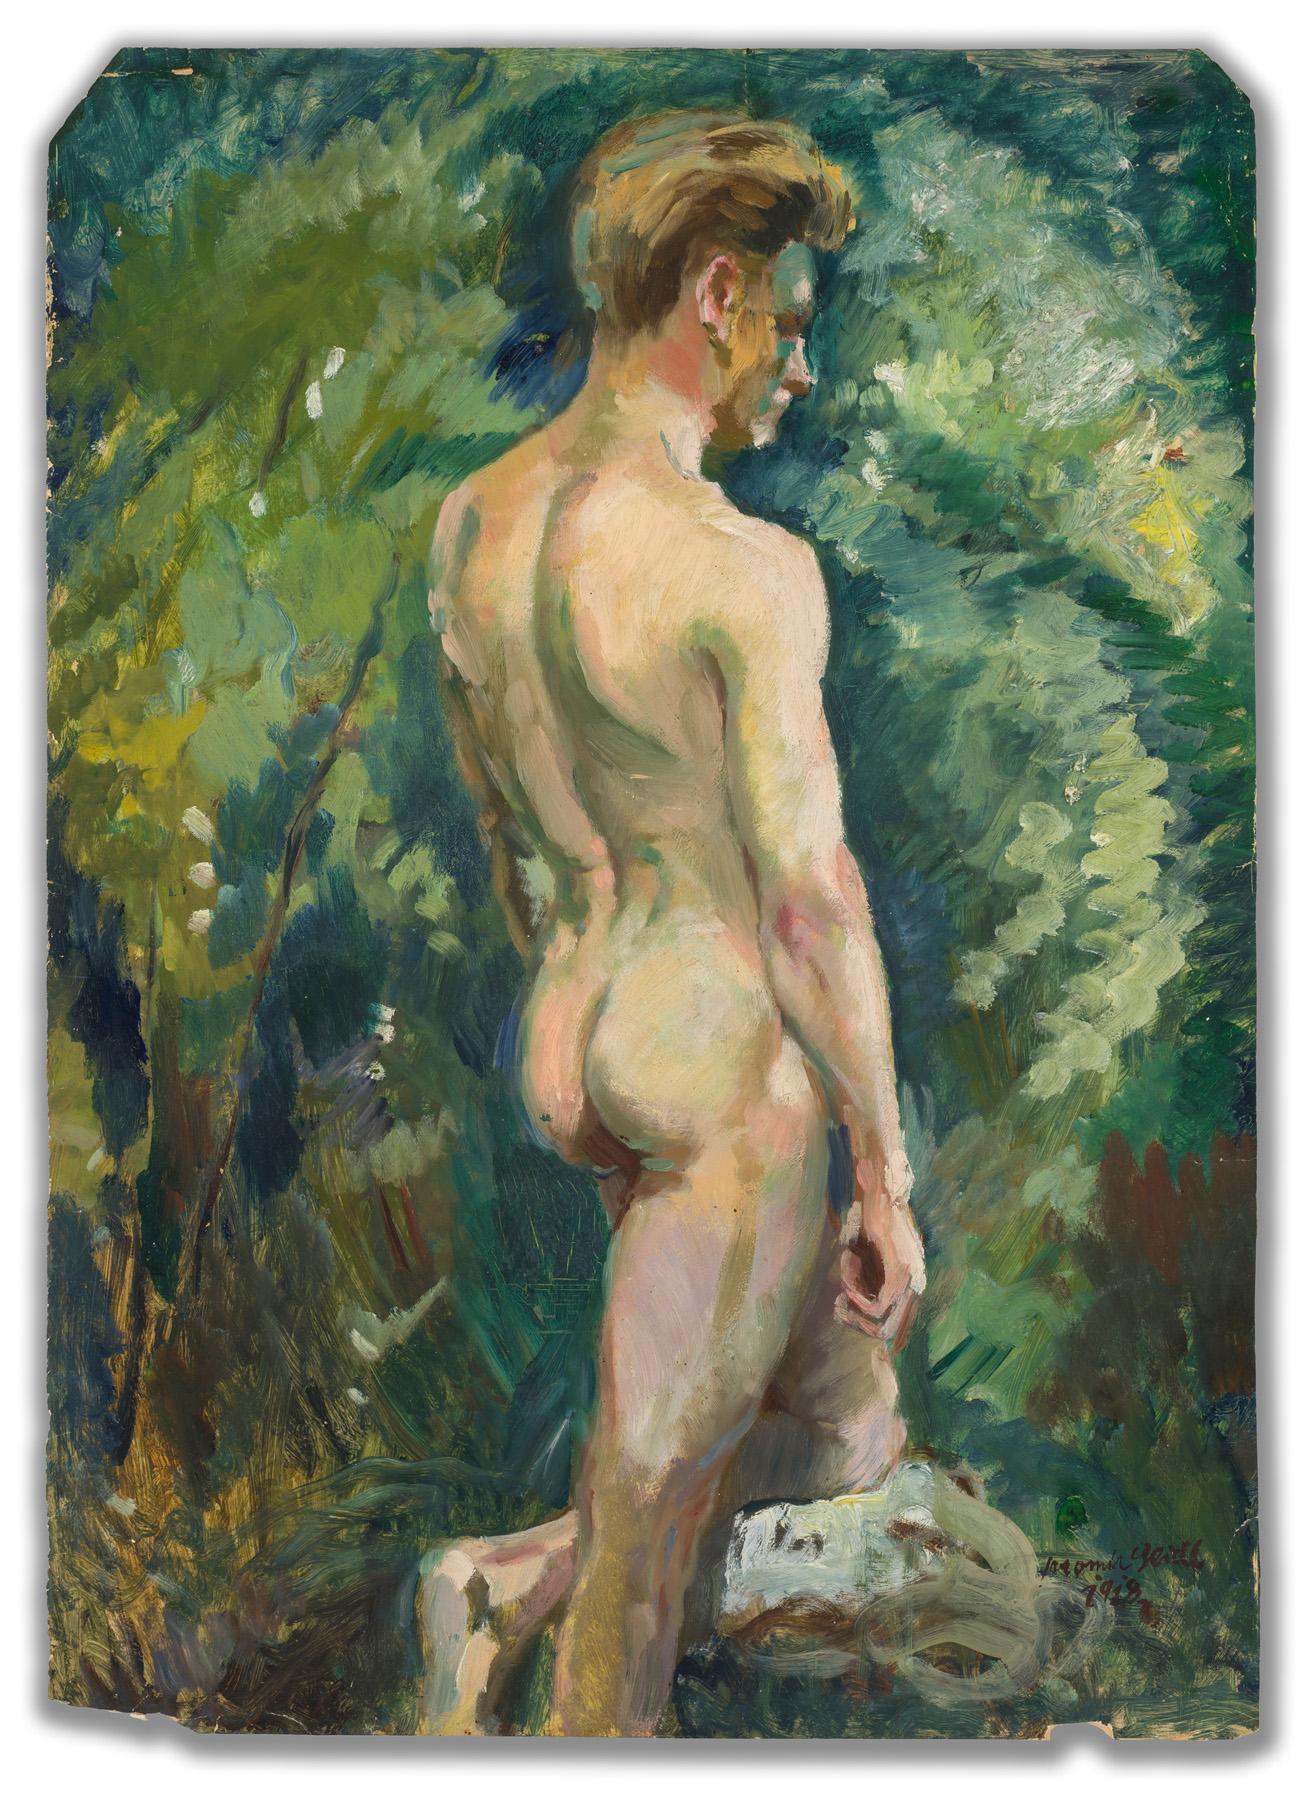 Male Nude in a Landscape - Painting by Jaromir Seidl